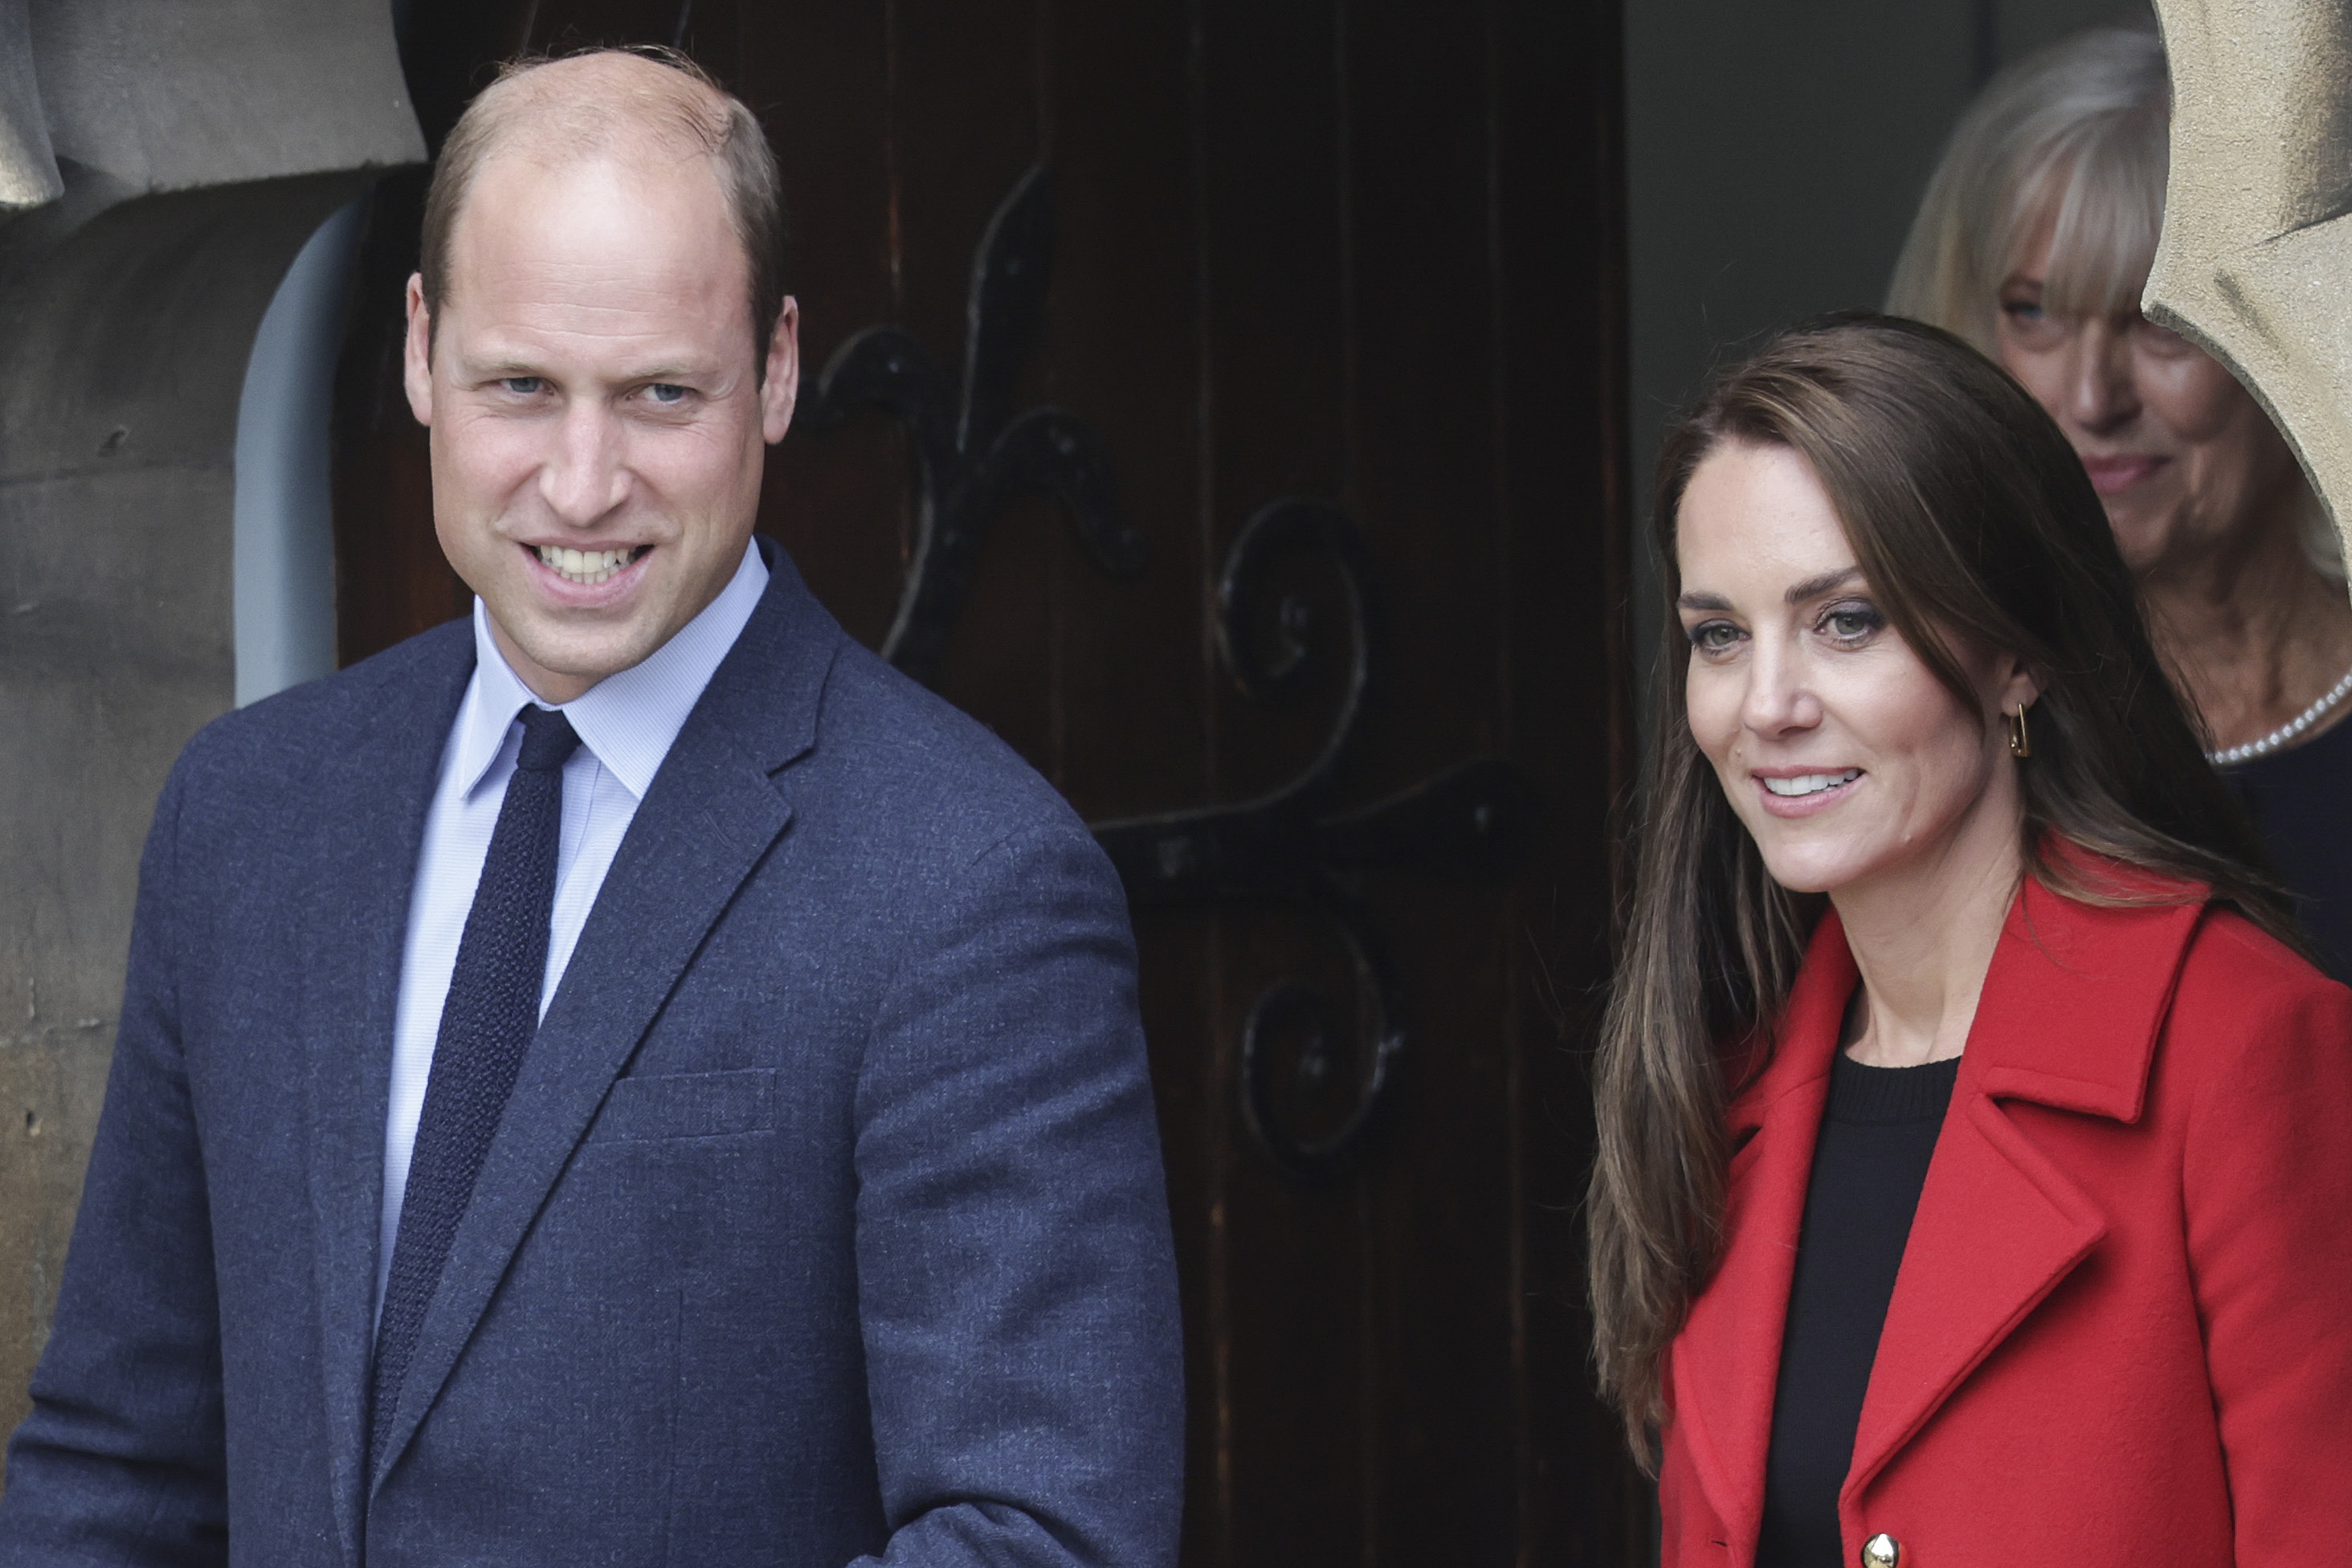 Prince William, who is known to have a temper similar to King Charles, according to one author, sides with Kate Middleton